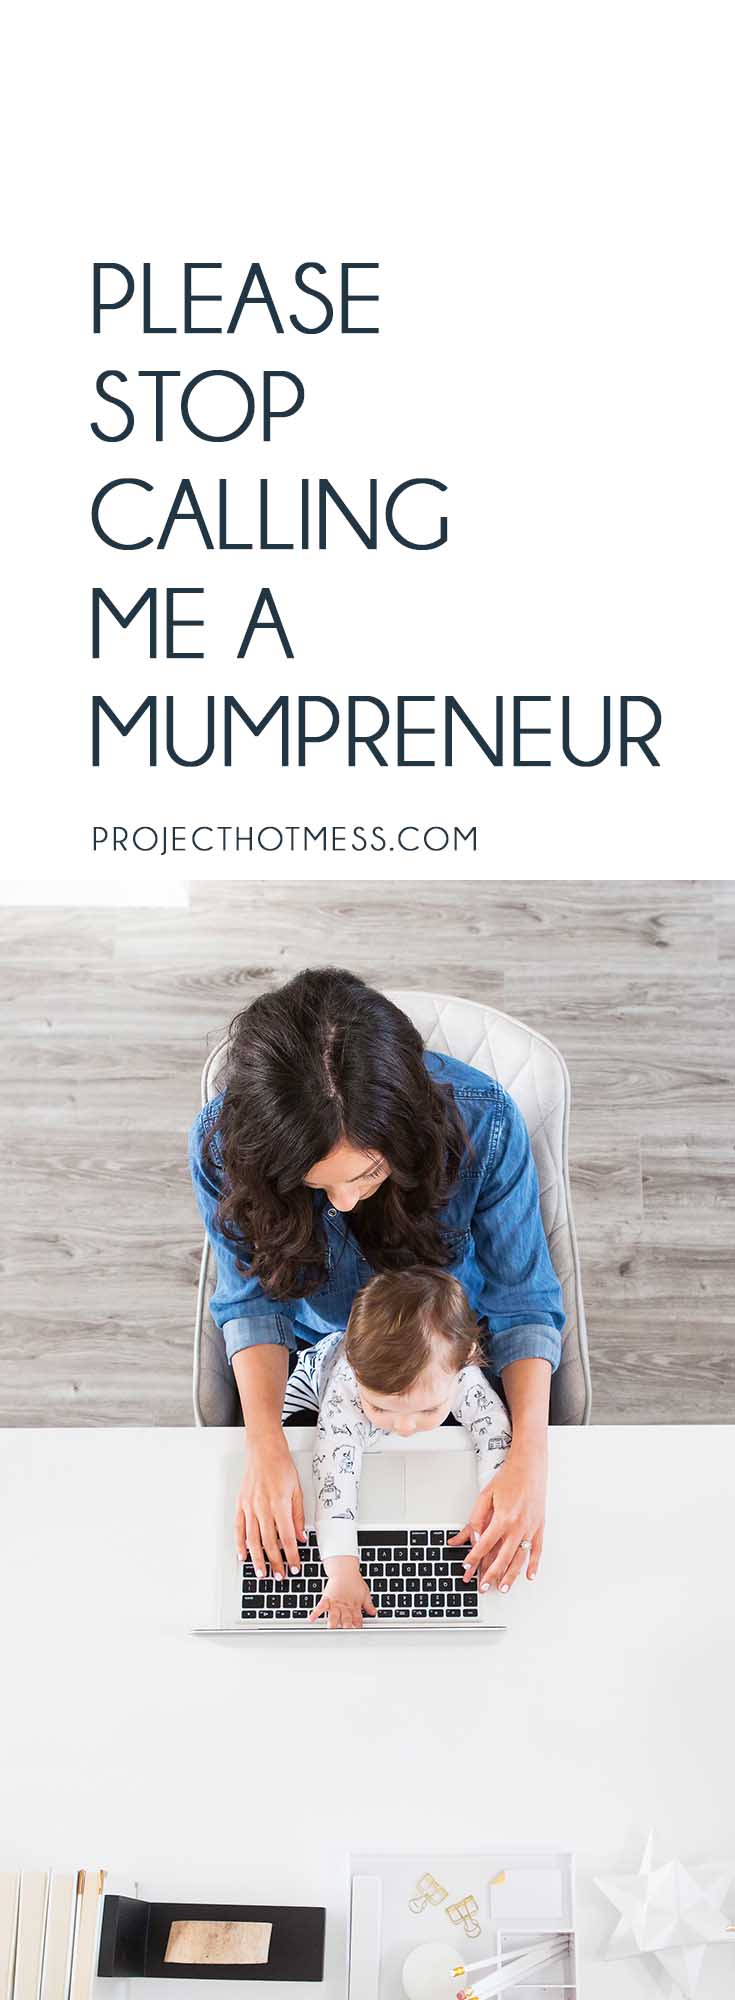 There's one word that really gets under my skin, 'Mumpreneur'. I offer so much more to business and society than simply being defined by being 'just a Mum'. Parenting | Parenting Advice | Mom Life | Parenting Goals | Parenting Ideas | Parenting Tips | Parenting Types | Parenting Hacks | Positive Parenting | Parenthood | Motherhood | Surviving Motherhood | Entrepreneur | Mumpreneur | Working Mum | Work at Home Mum